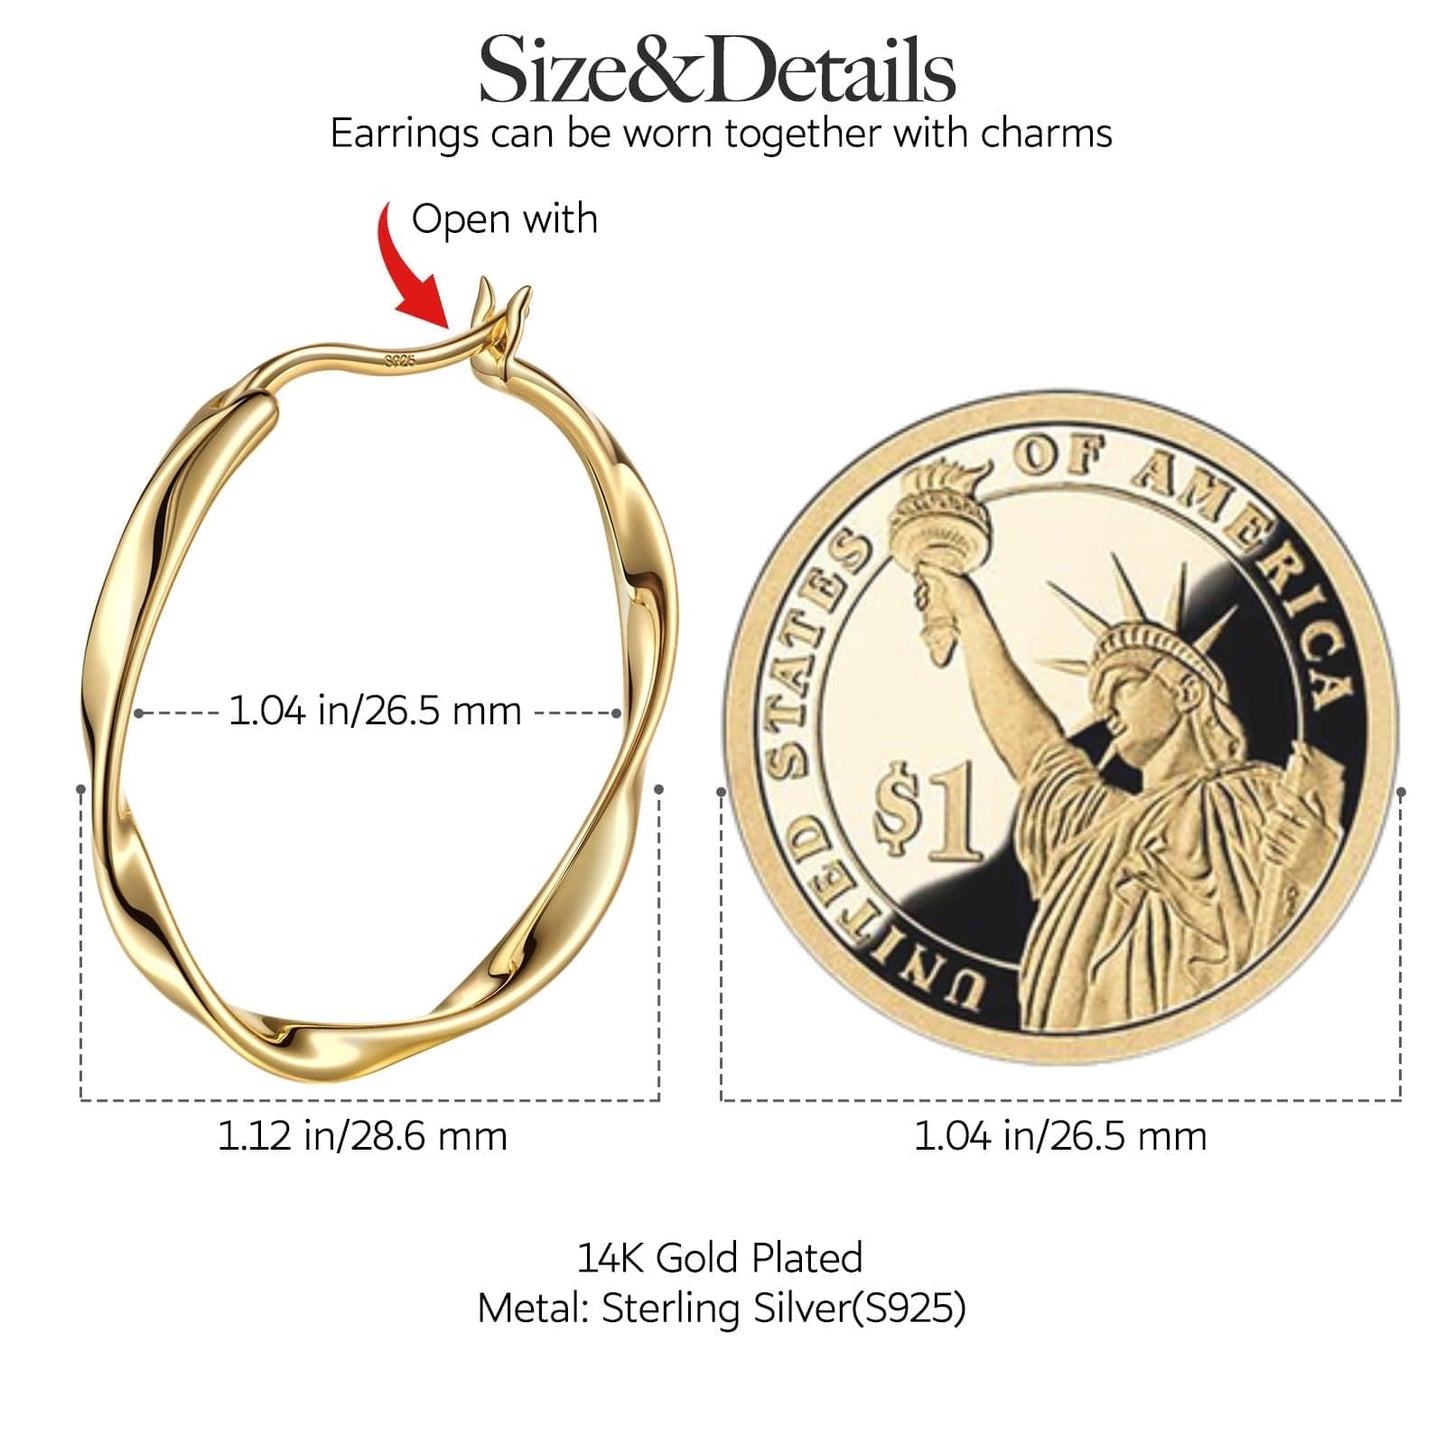 Sterling Silver Merry Transport Charms Earrings Set With Enamel In 14K Gold Plated